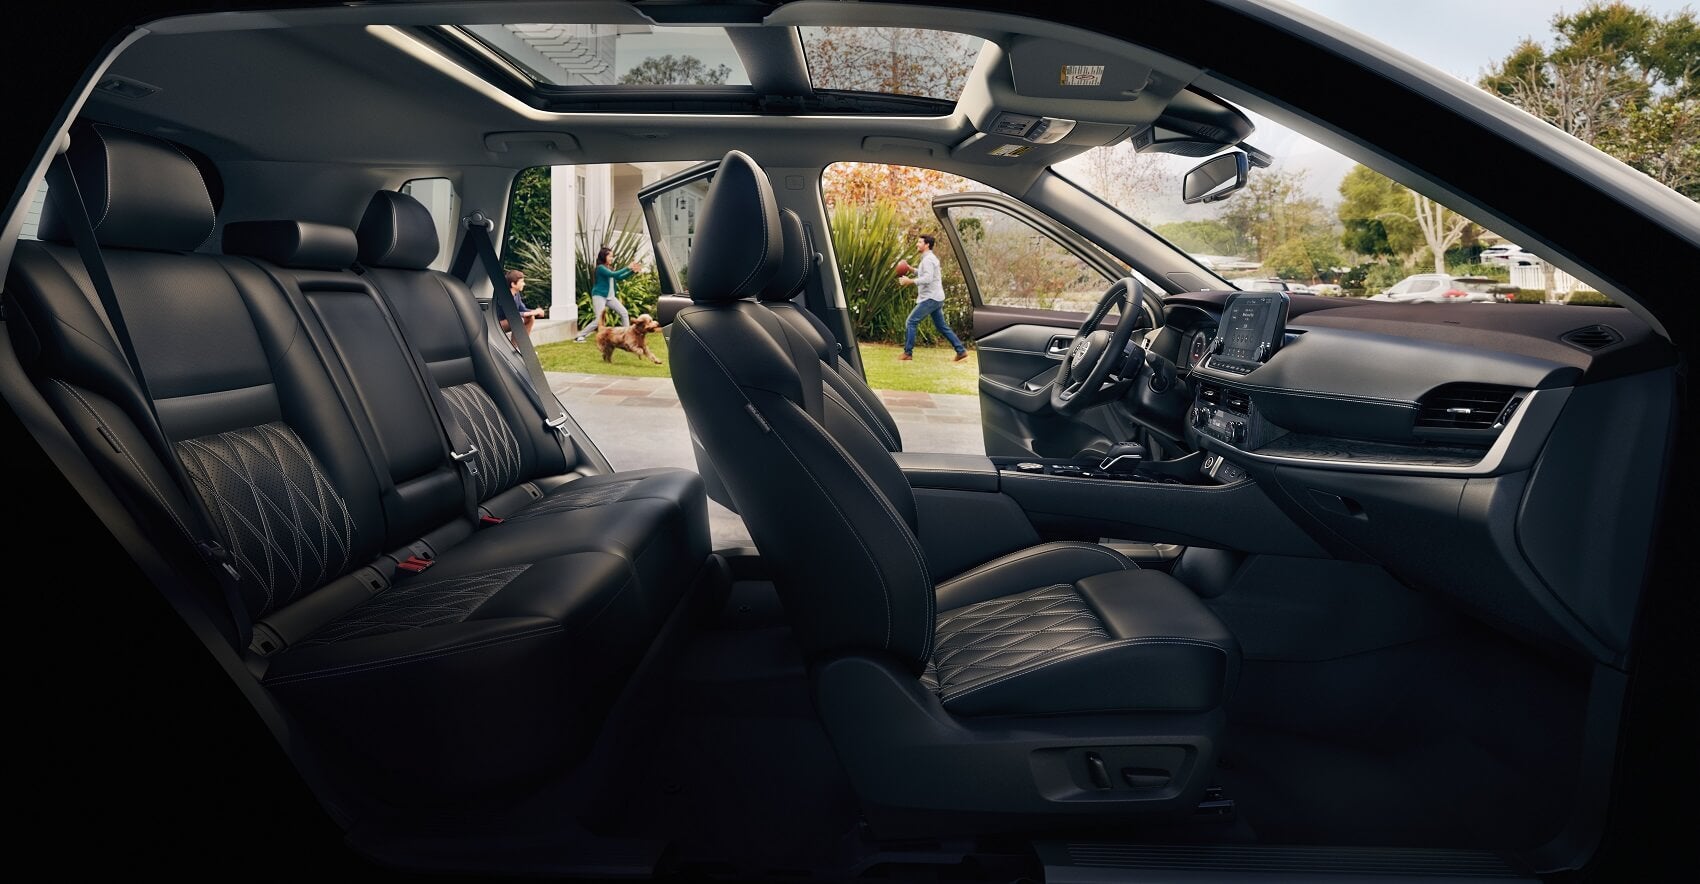 Cabin of the Nissan Rogue